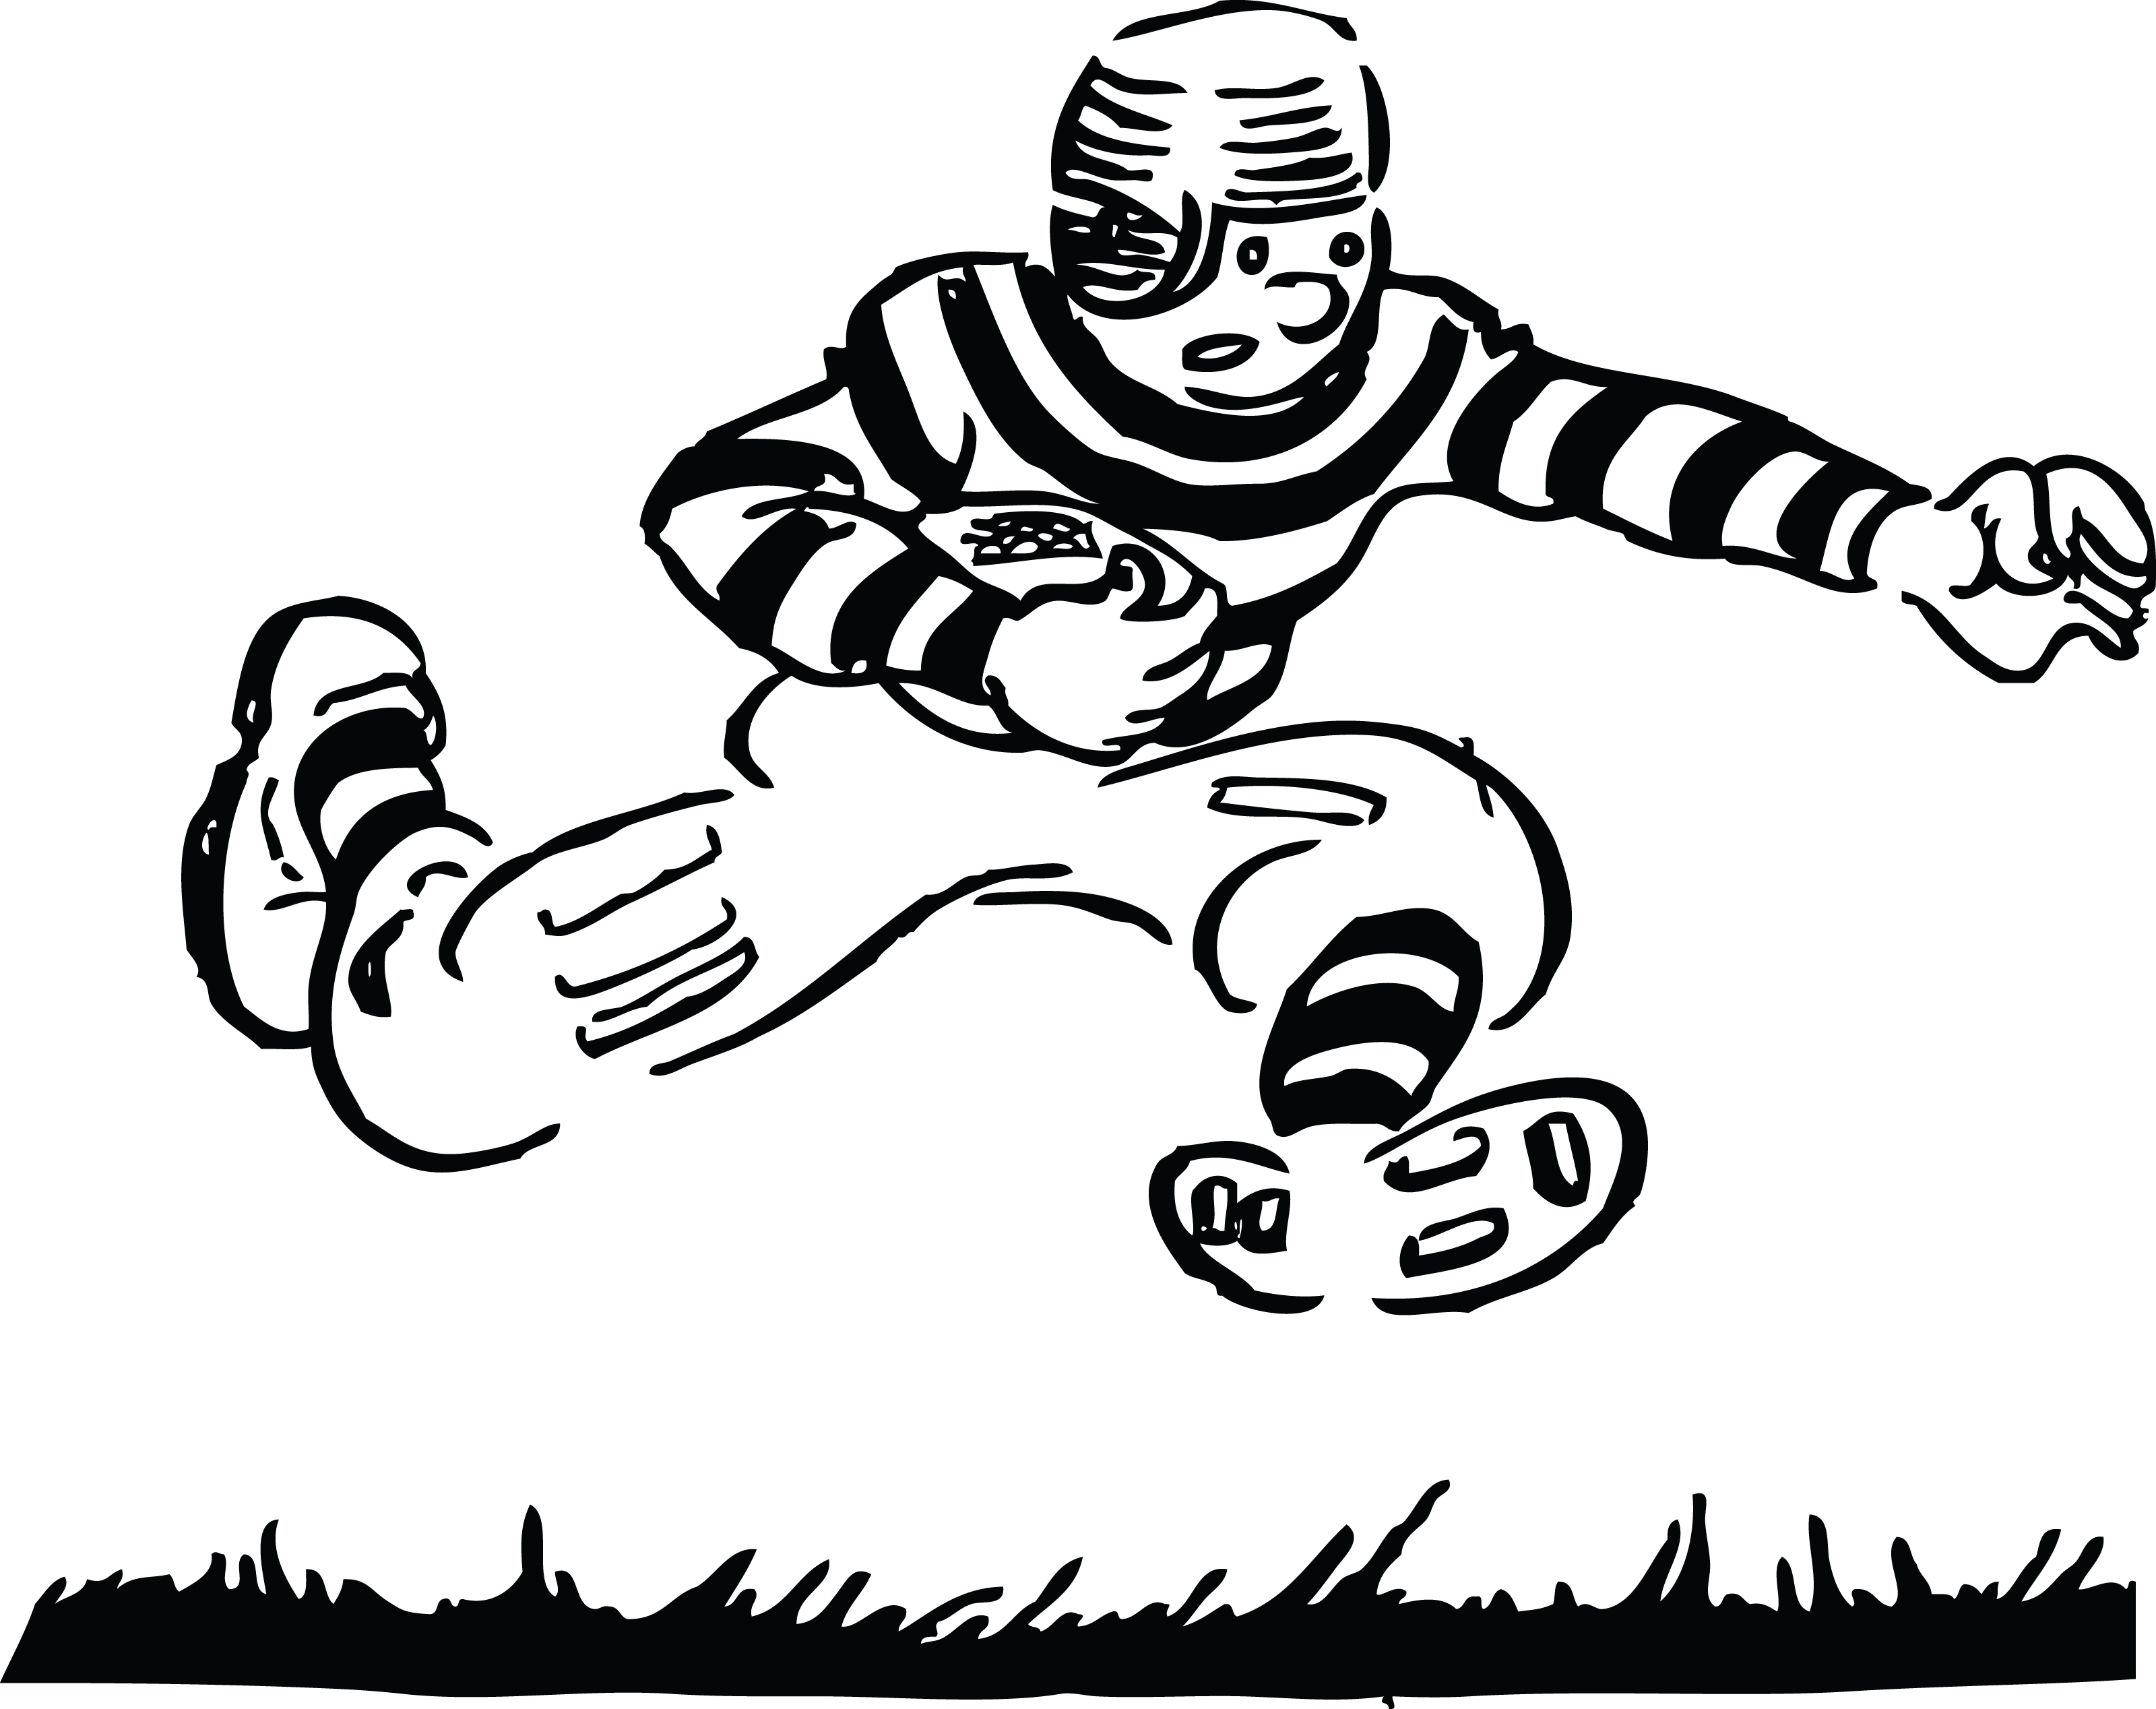 Football  black and white clip art white football and black with bow clipart 2